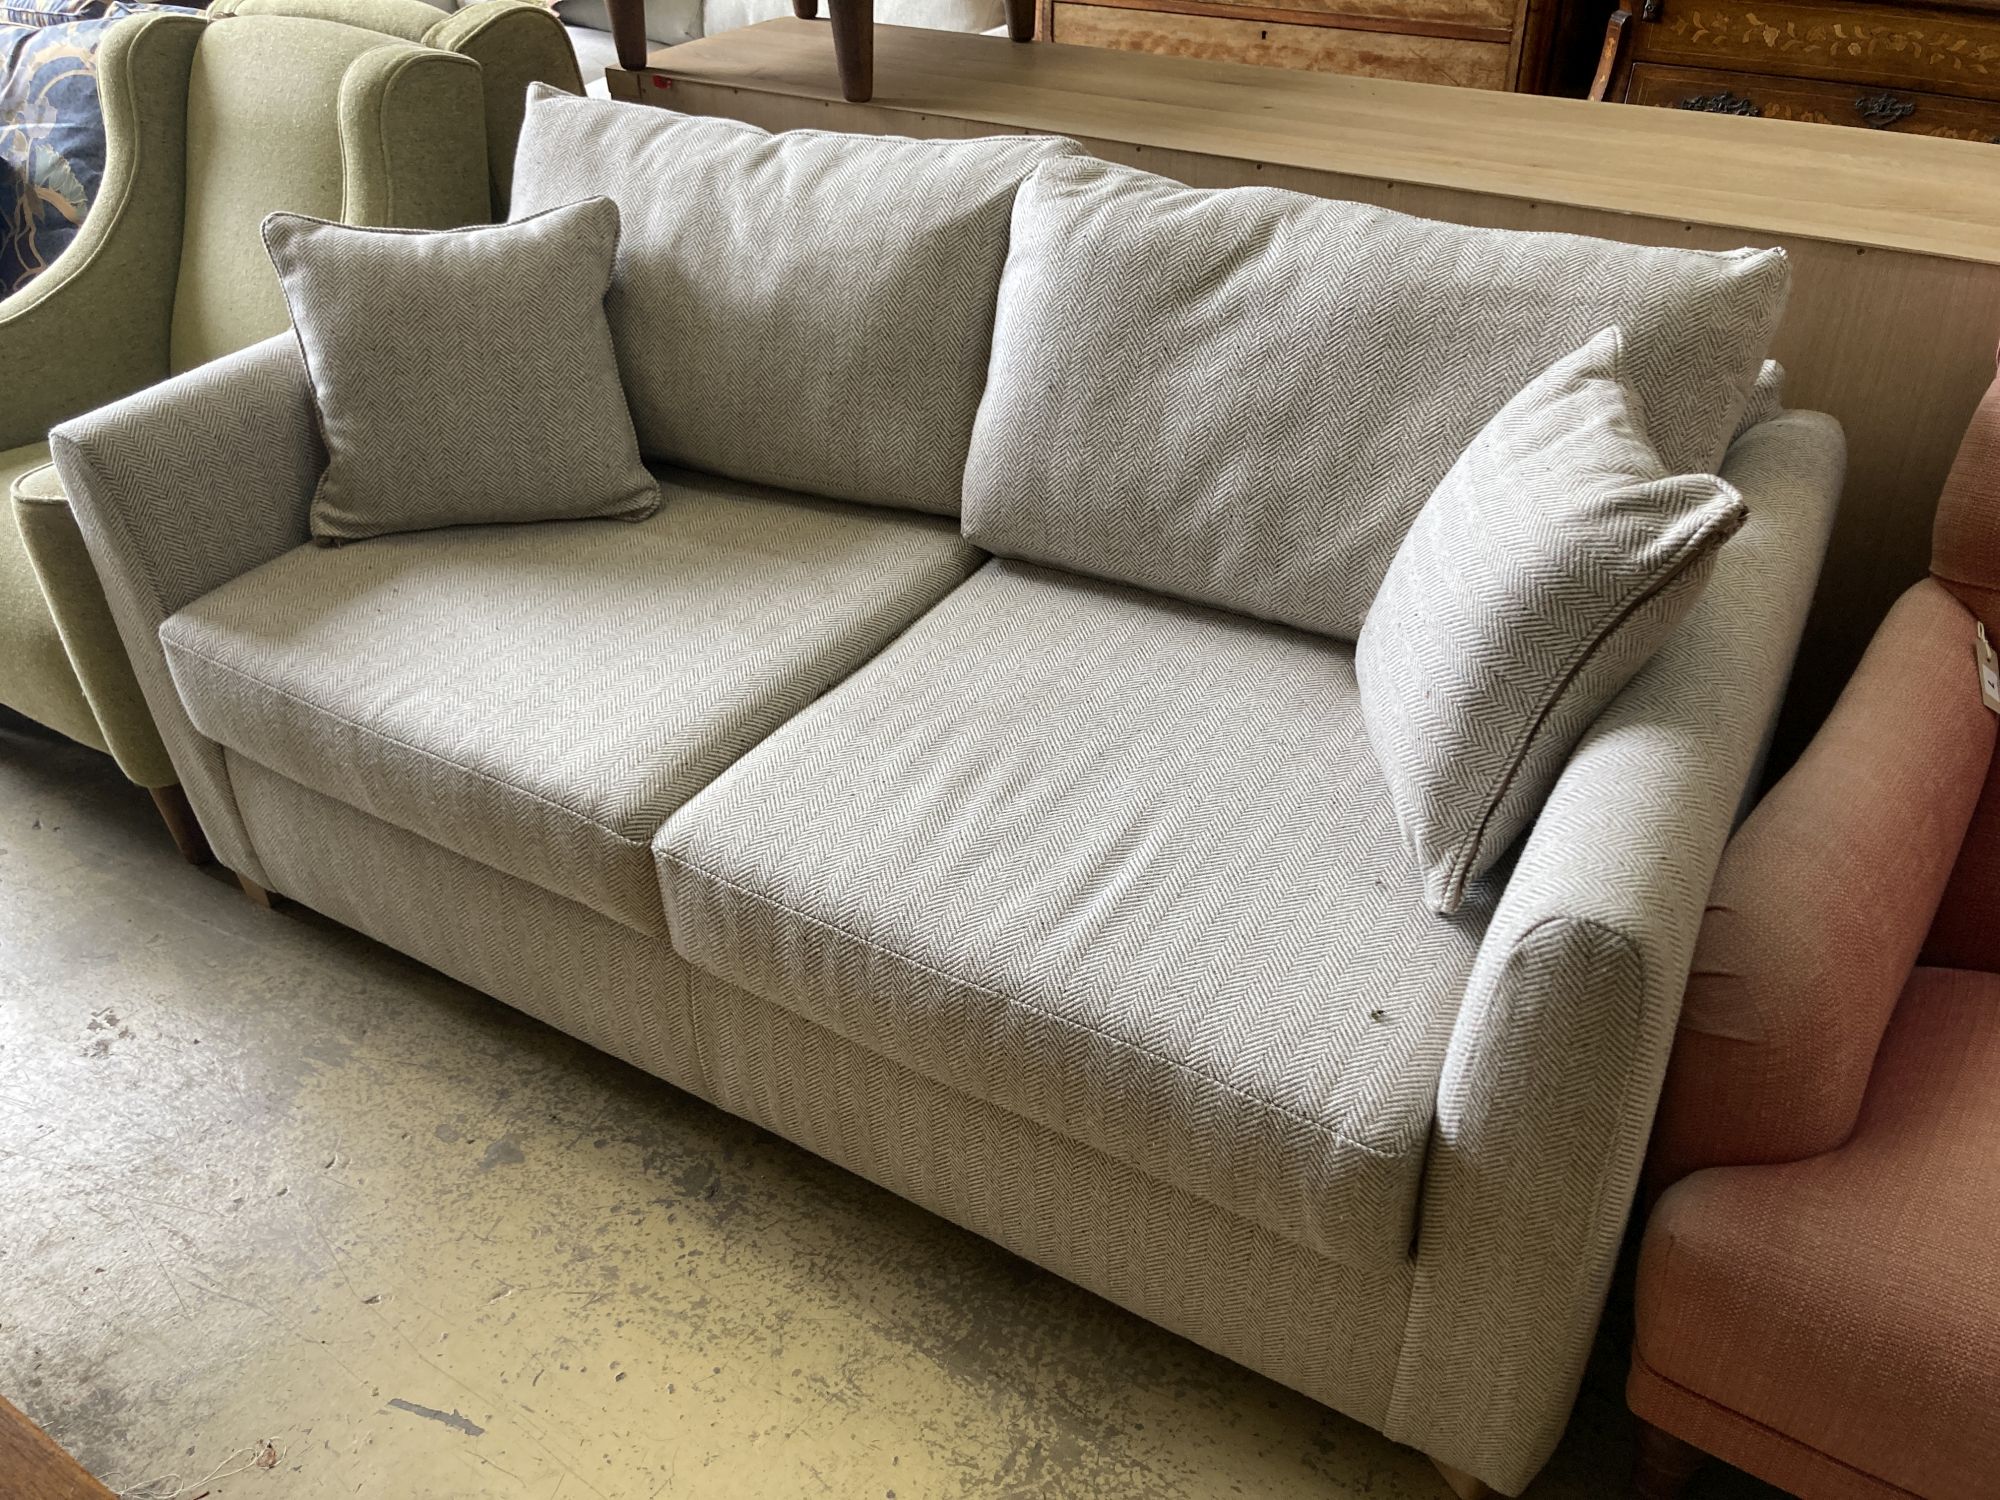 A modern contemporary two-seater sofa bed, length 174cm, width 95cm, height 86cm